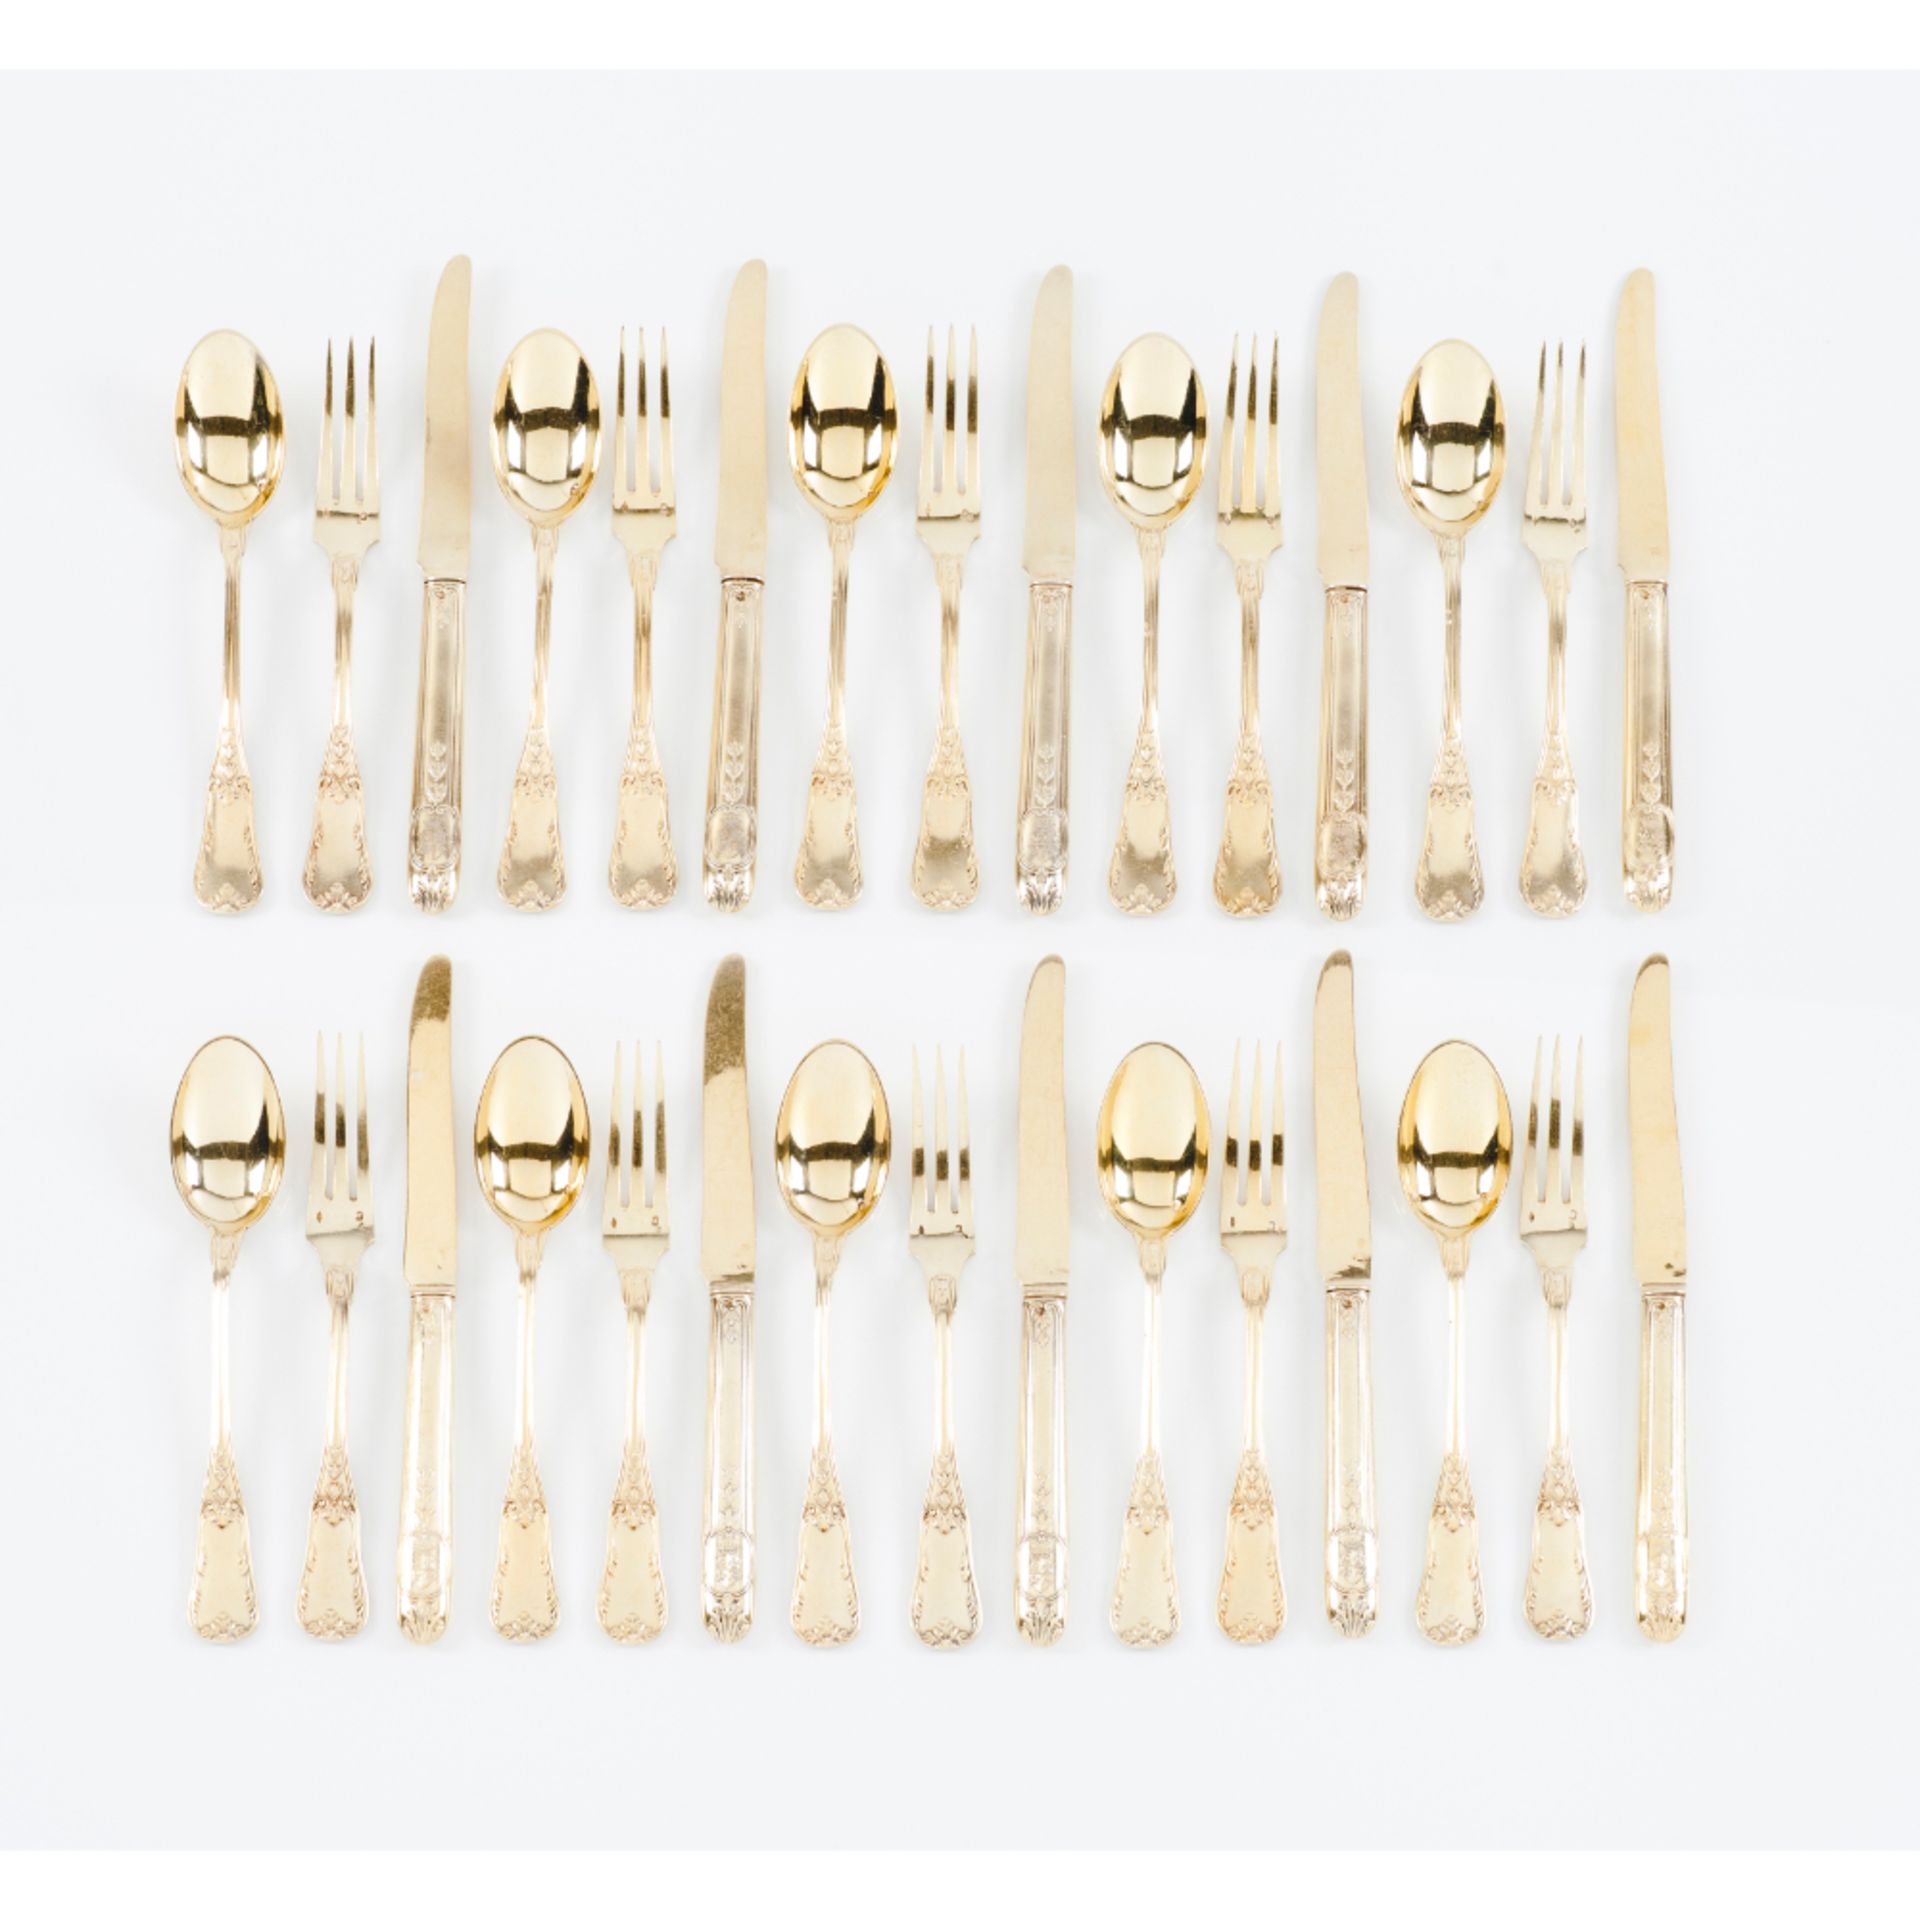 A set of hors-d'oeuvres cutlery